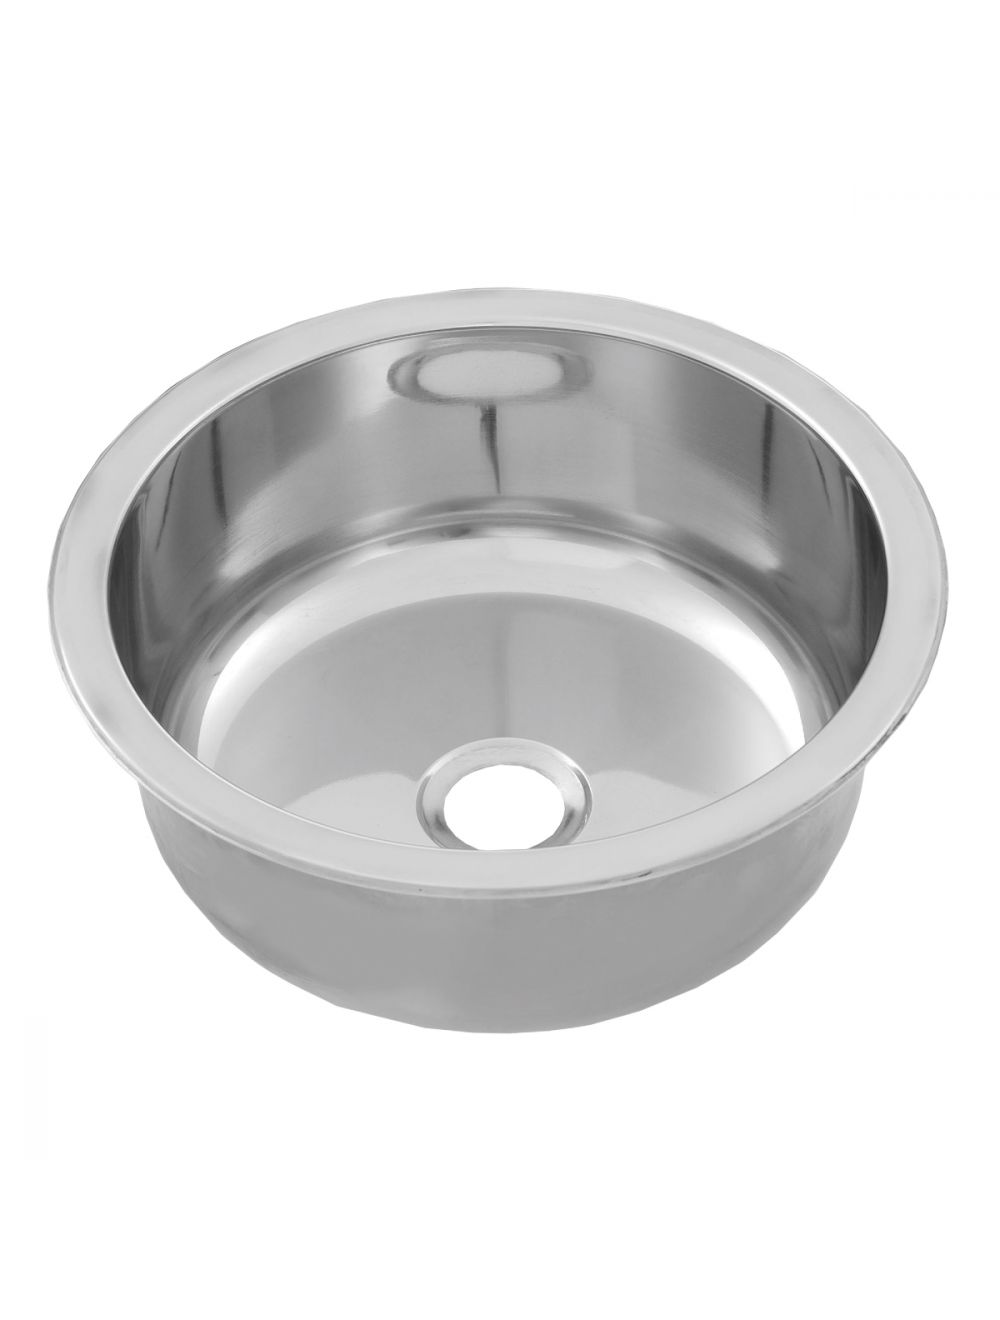 Inset Stainless Steel Sink 90mm Centre outlet